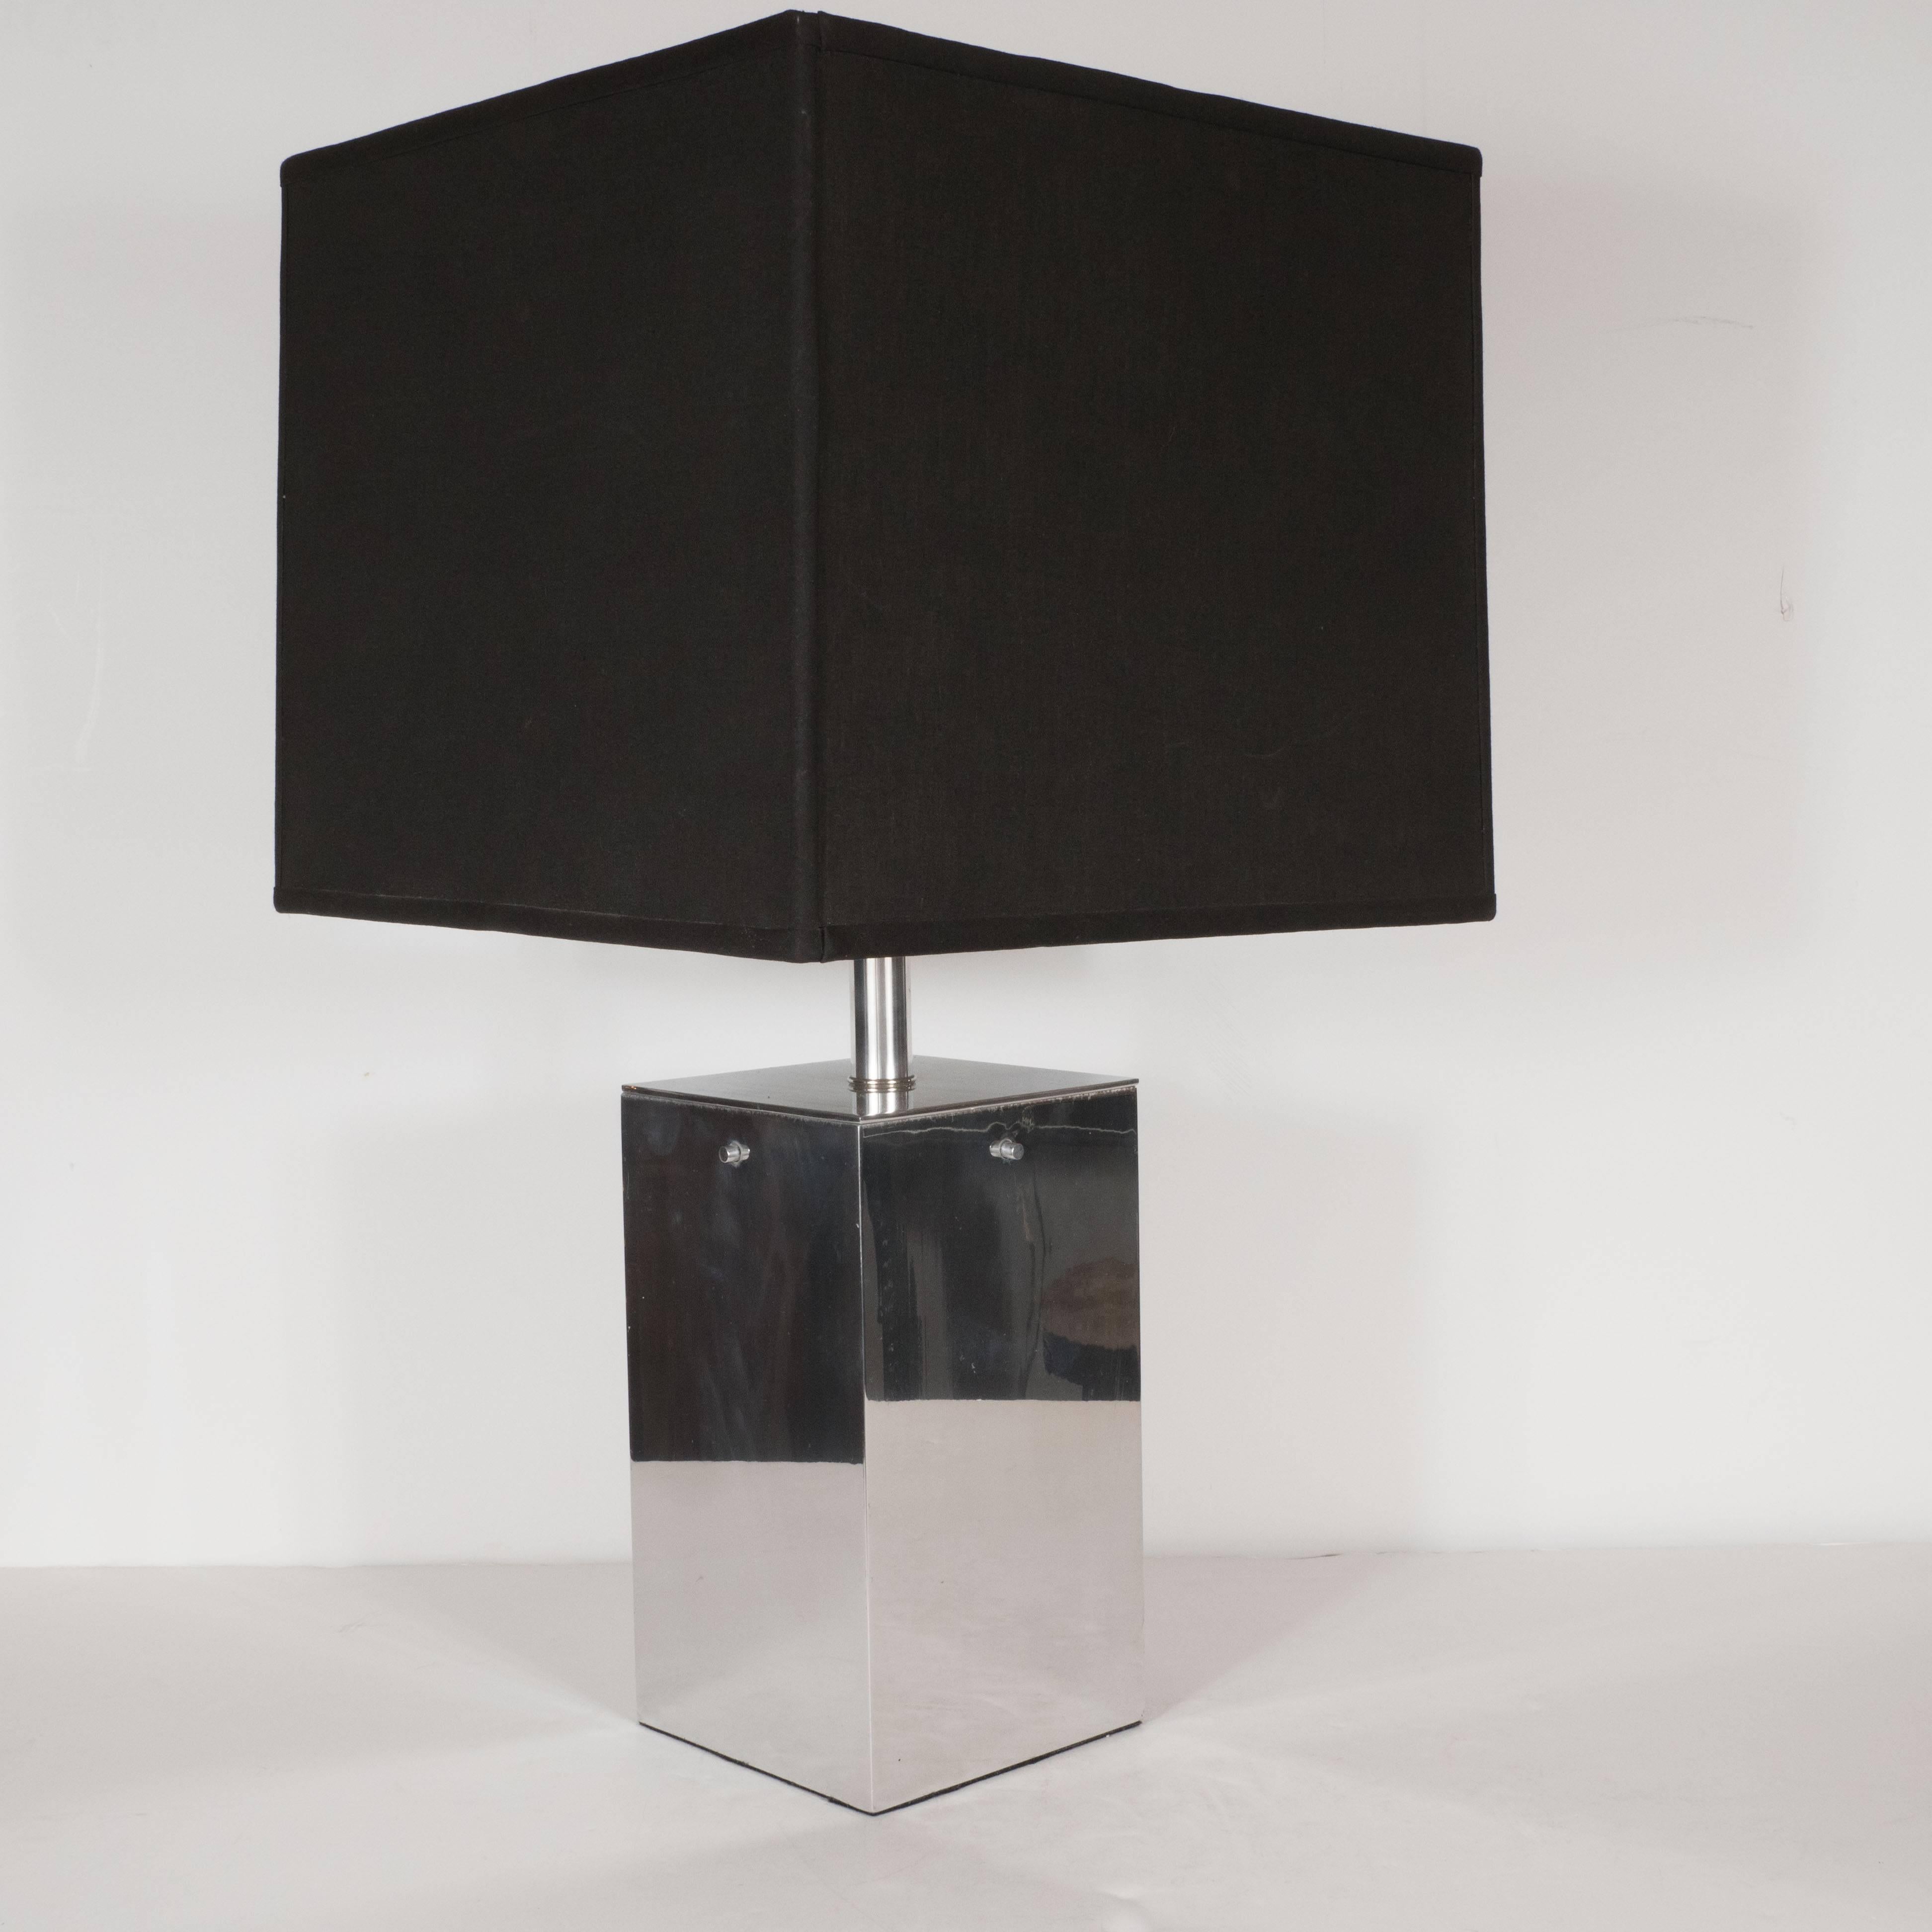 These sophisticated brushed aluminium lamps exemplify clean modern design at its best. Consisting of a rectangular cube of reflective metal, the austerity of the design naturally highlights the beauty of every element: the streamline neck that